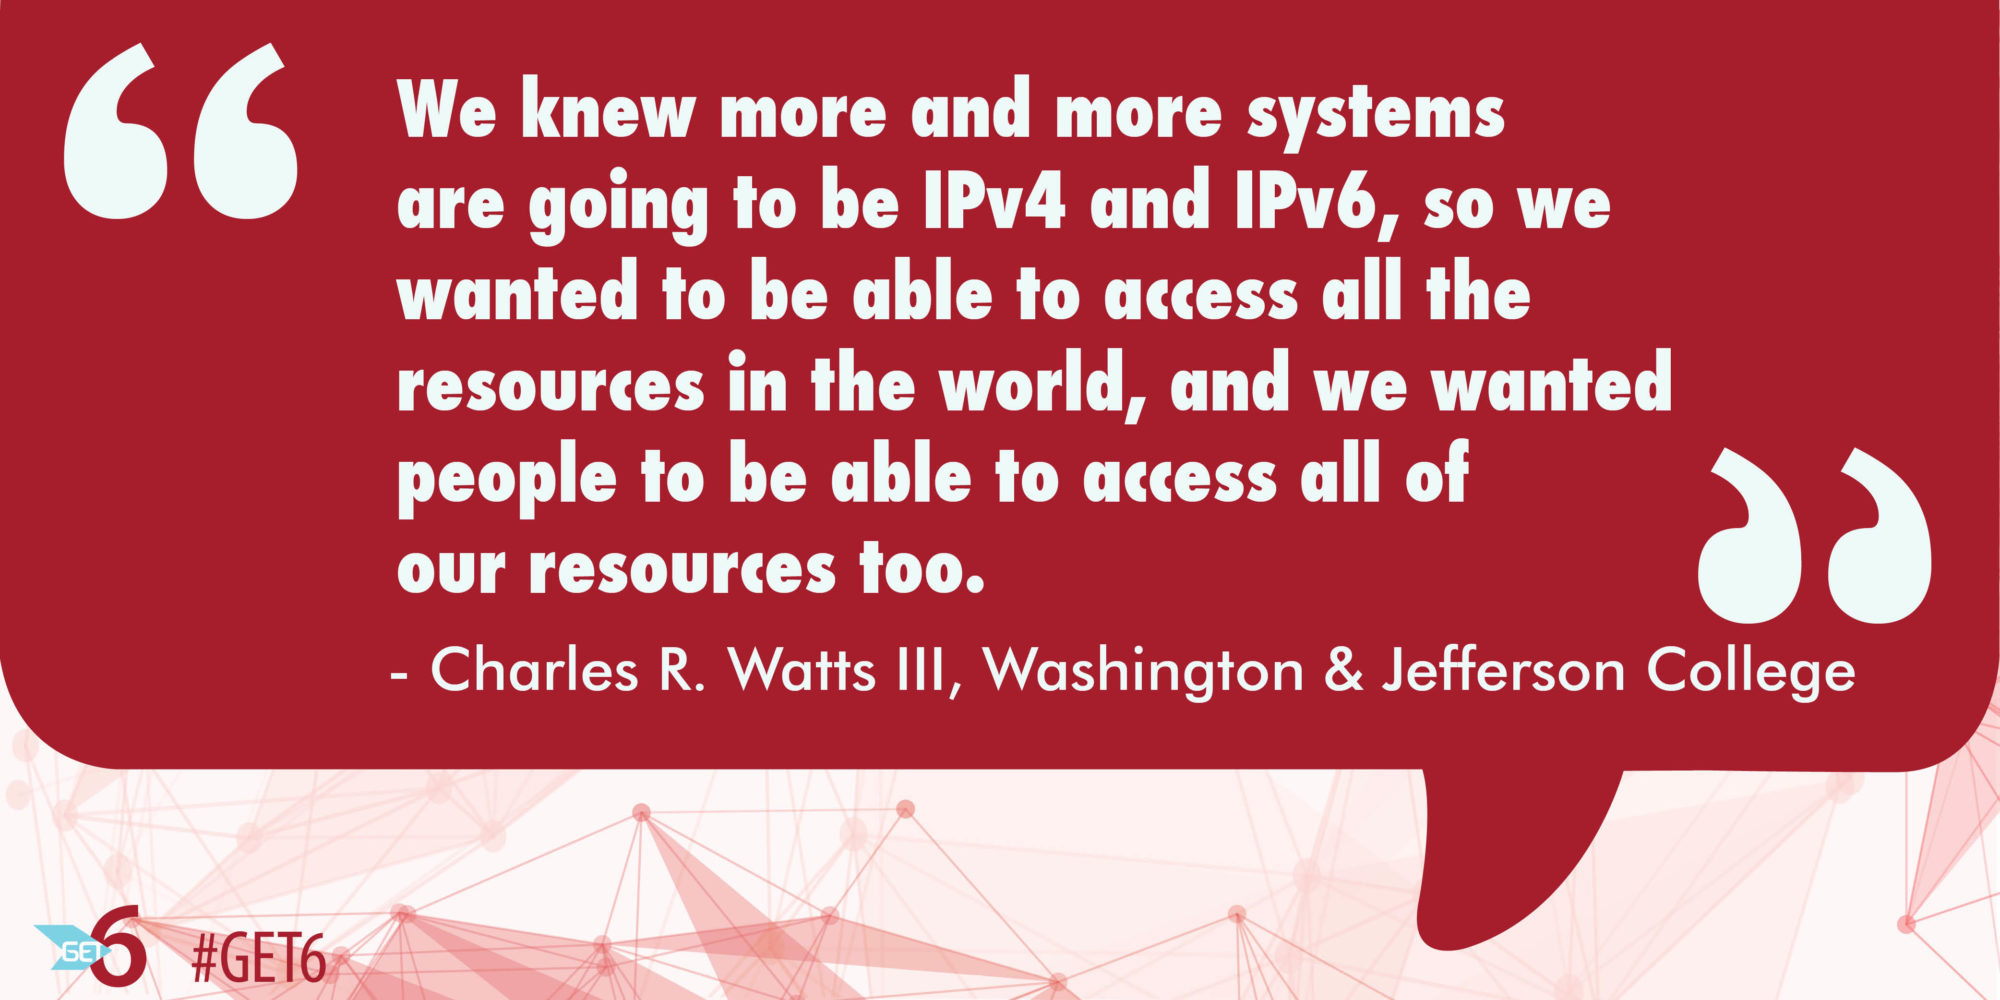 IPv6 to access all the resources in the world